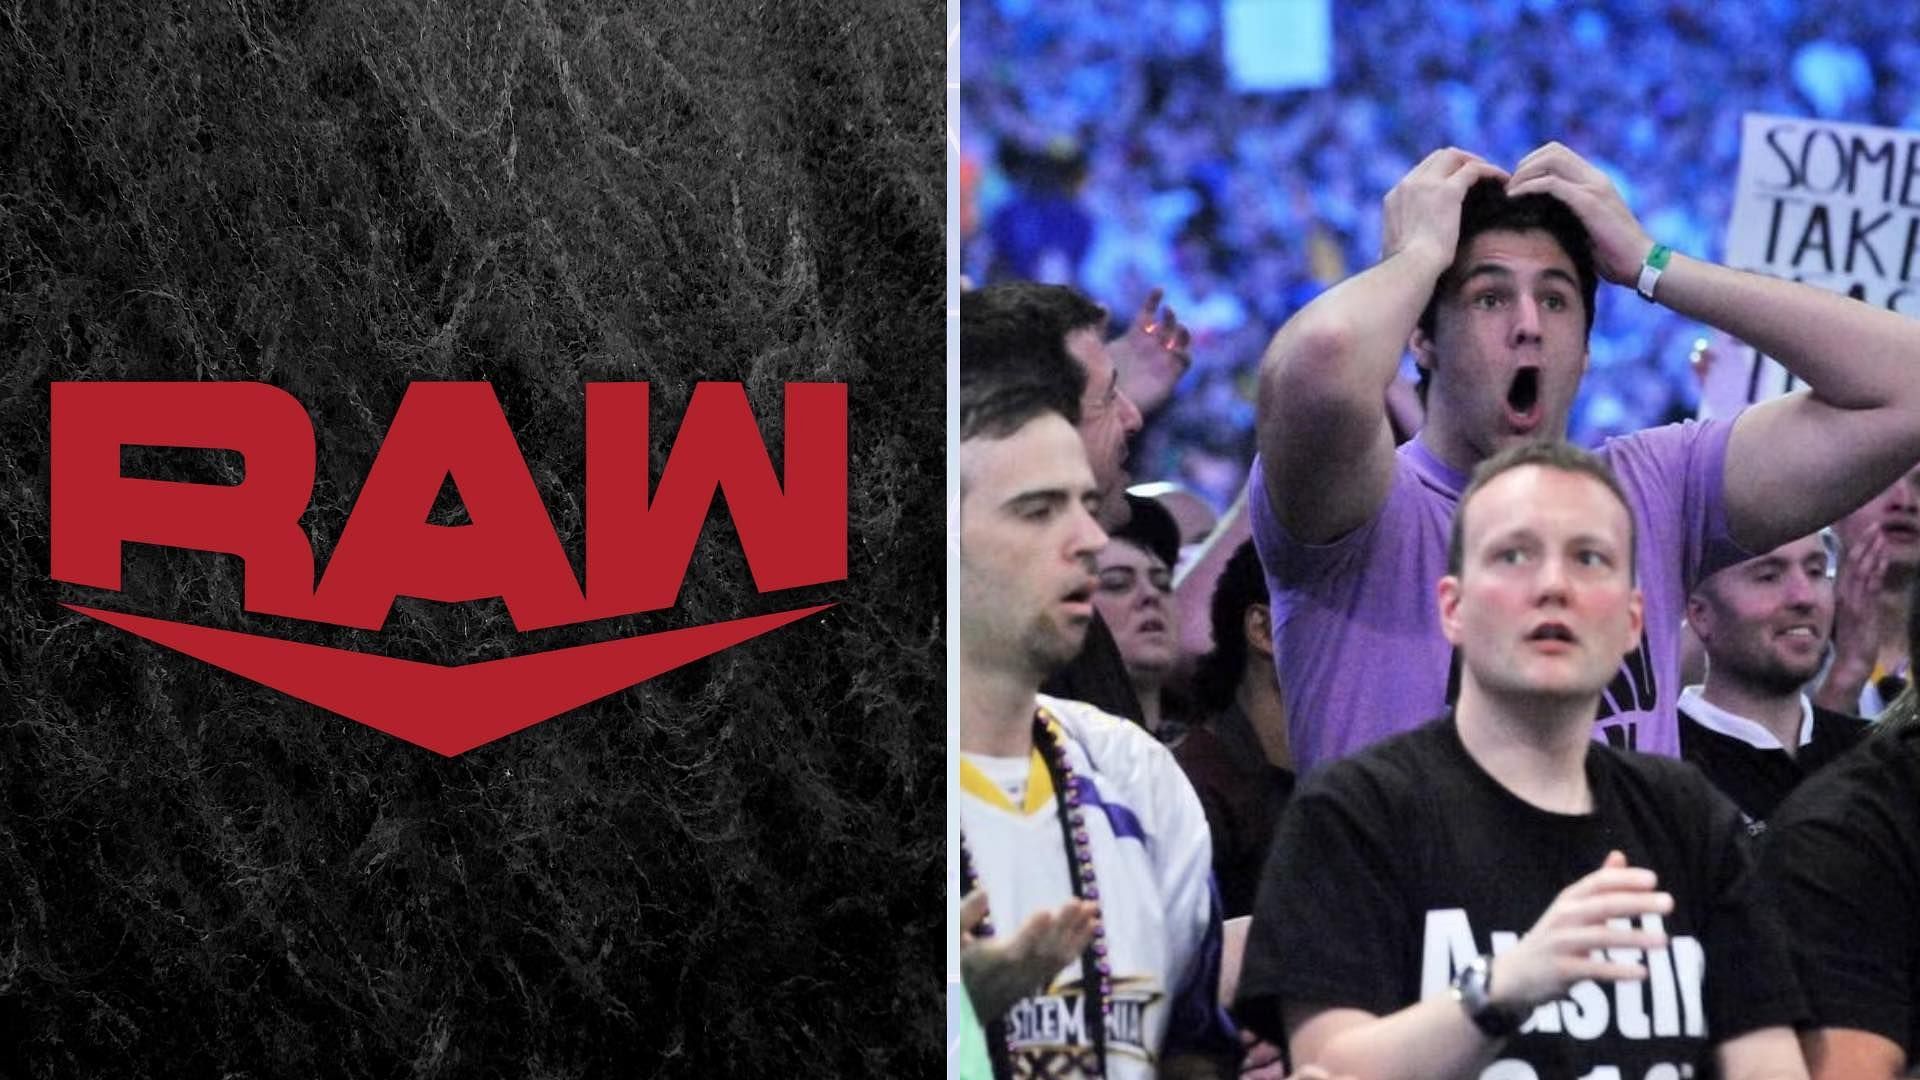 WWE RAW this week was live from the Wells Fargo Arena in Des Moines, Iowa